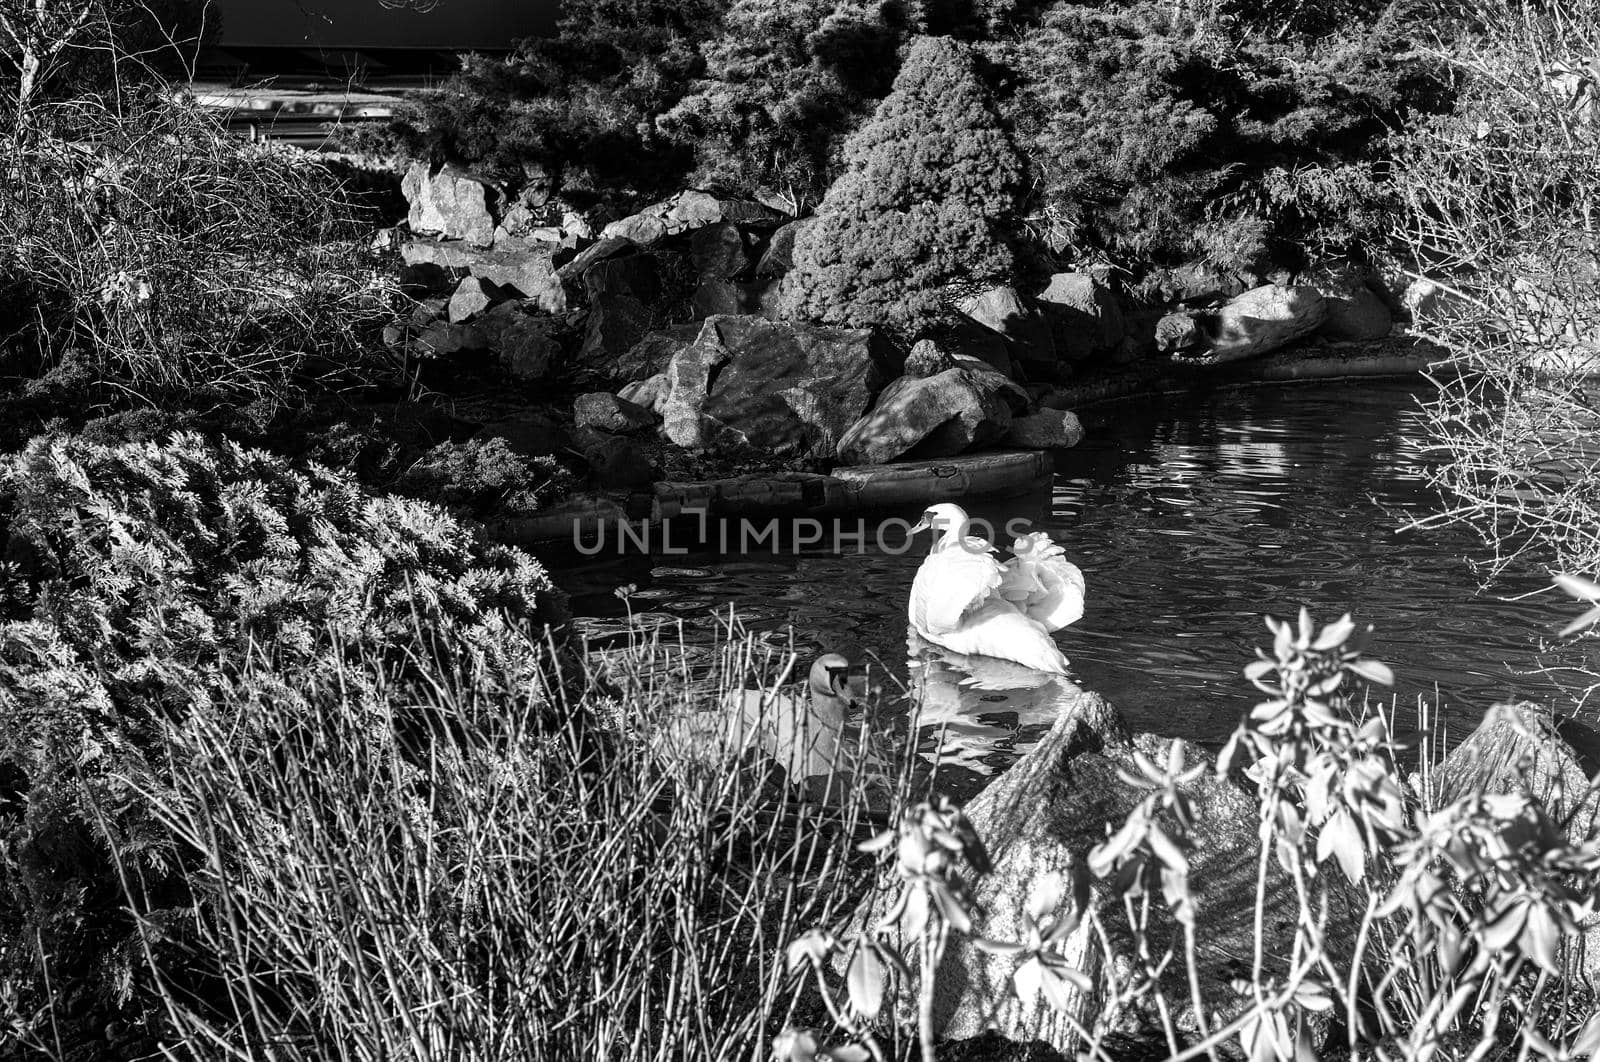 One beautiful white Swan swims on the surface of the lake near the rocky shore. Black and white image.